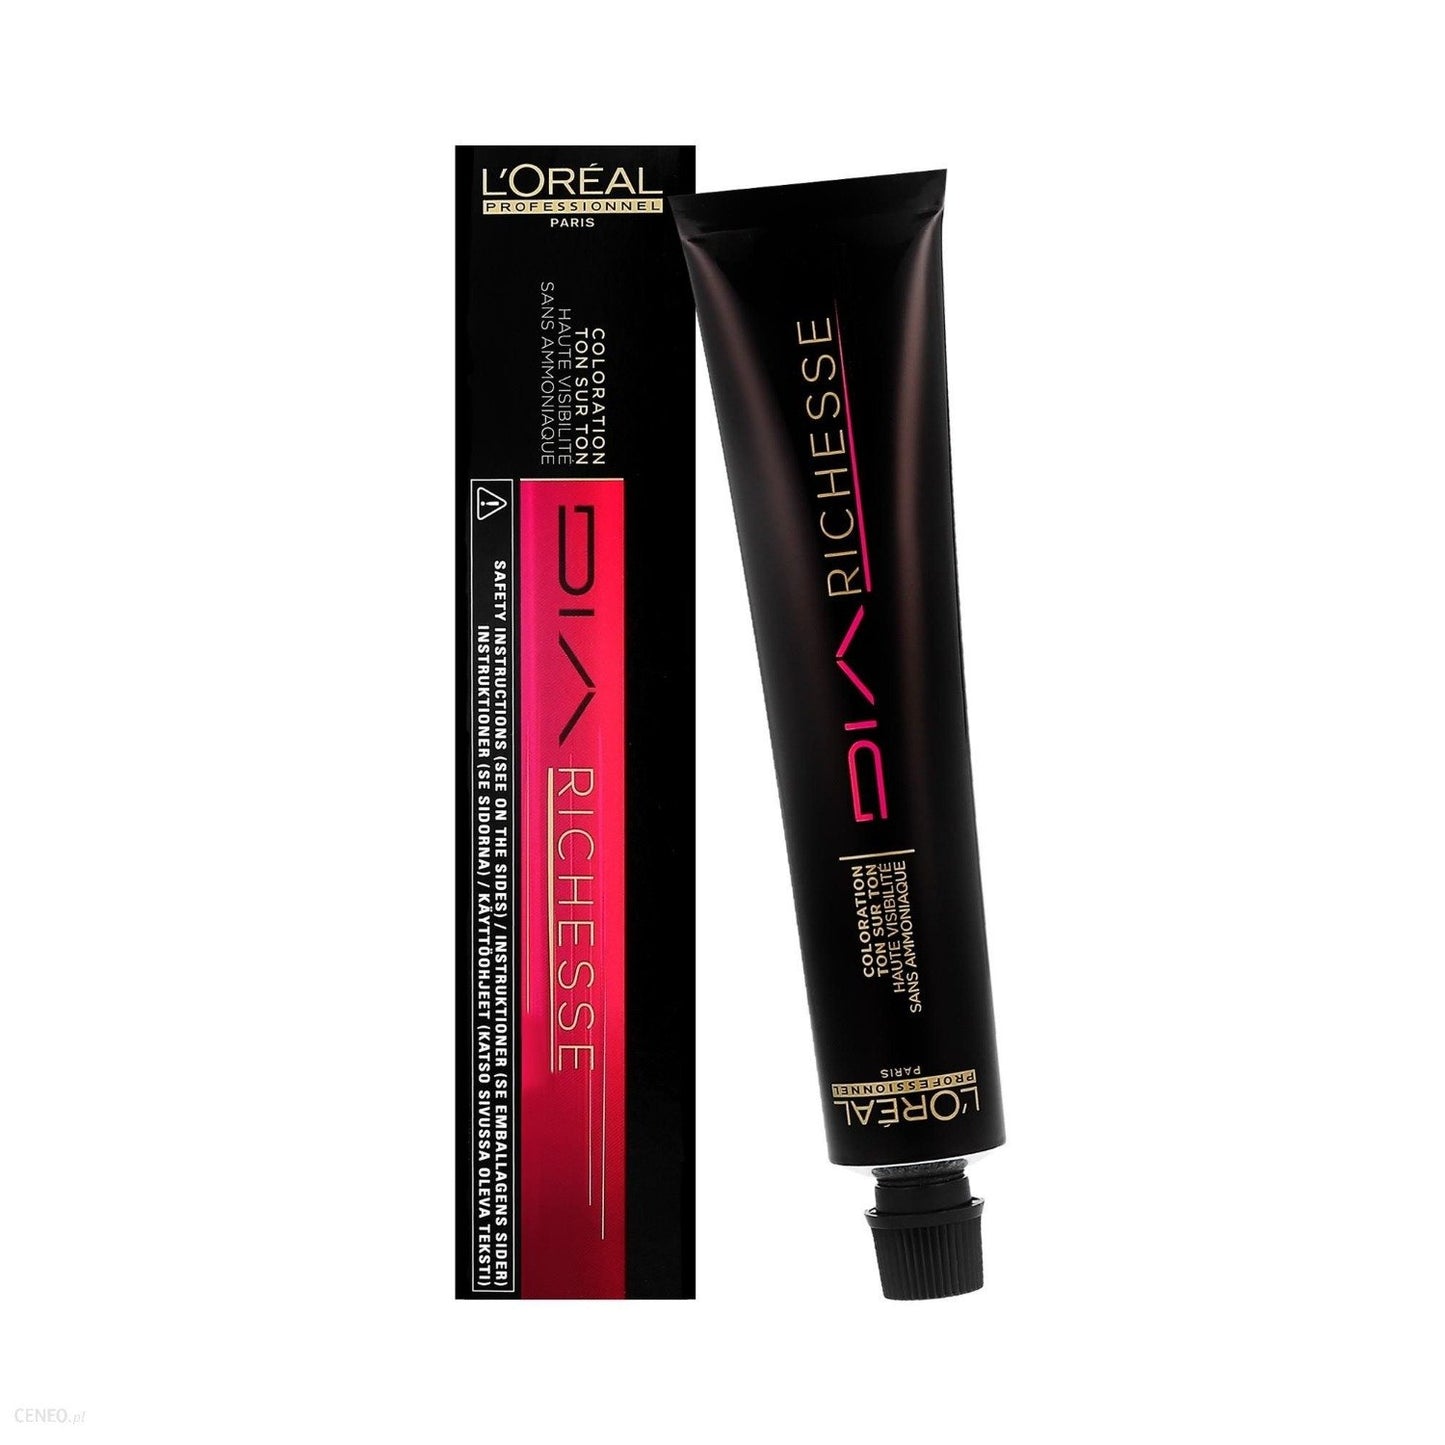 L'Oreal Dia Richesse Semi Permanent Hair Dye - 50ml, 5.15 Frosted Chestnut